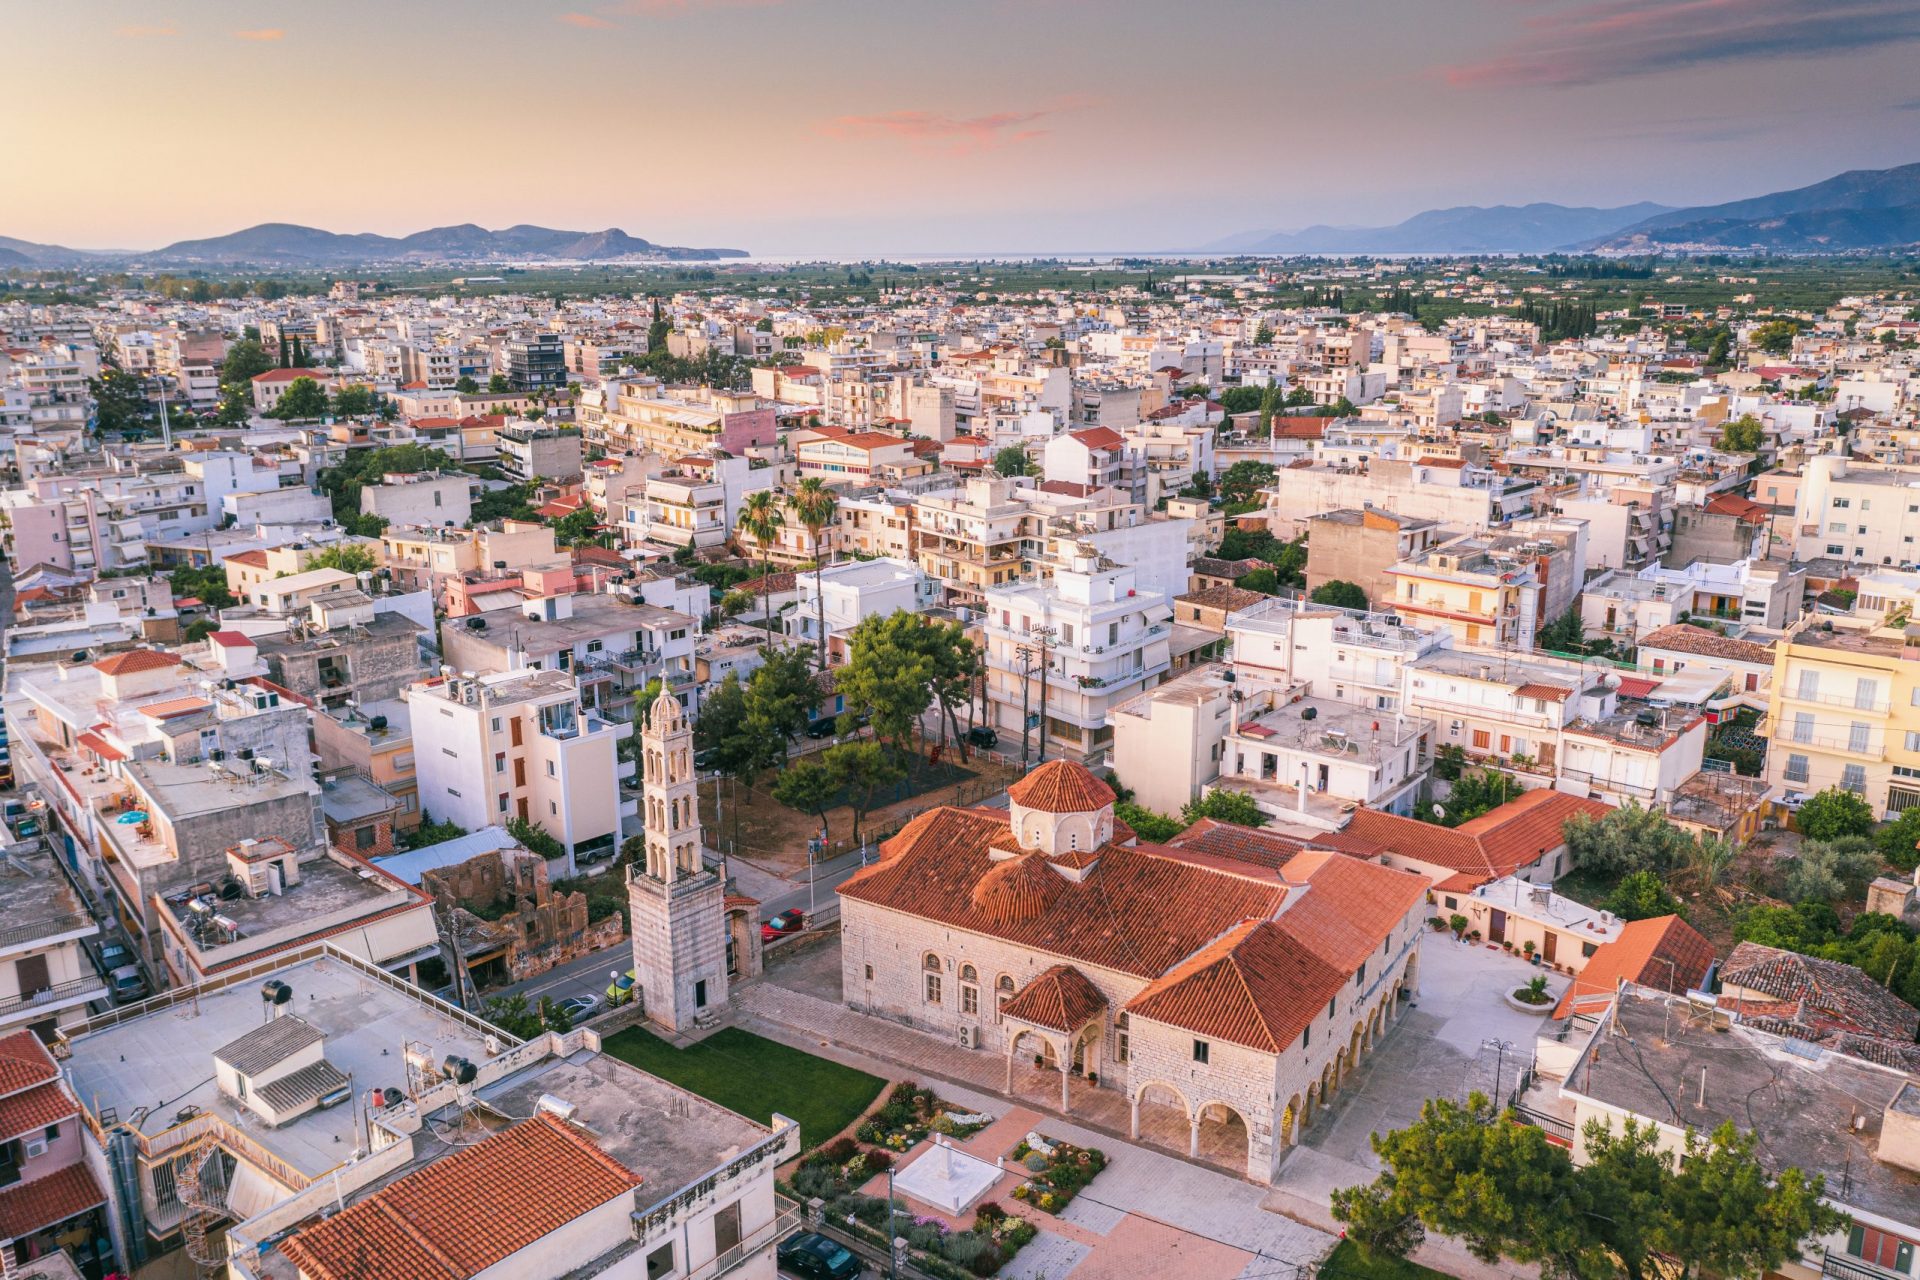 <p>Argos is one of the oldest cities in the world that is still inhabited. It looks like Greece as you imagine it, with a mild Mediterranean climate and archaeological treasures.</p>